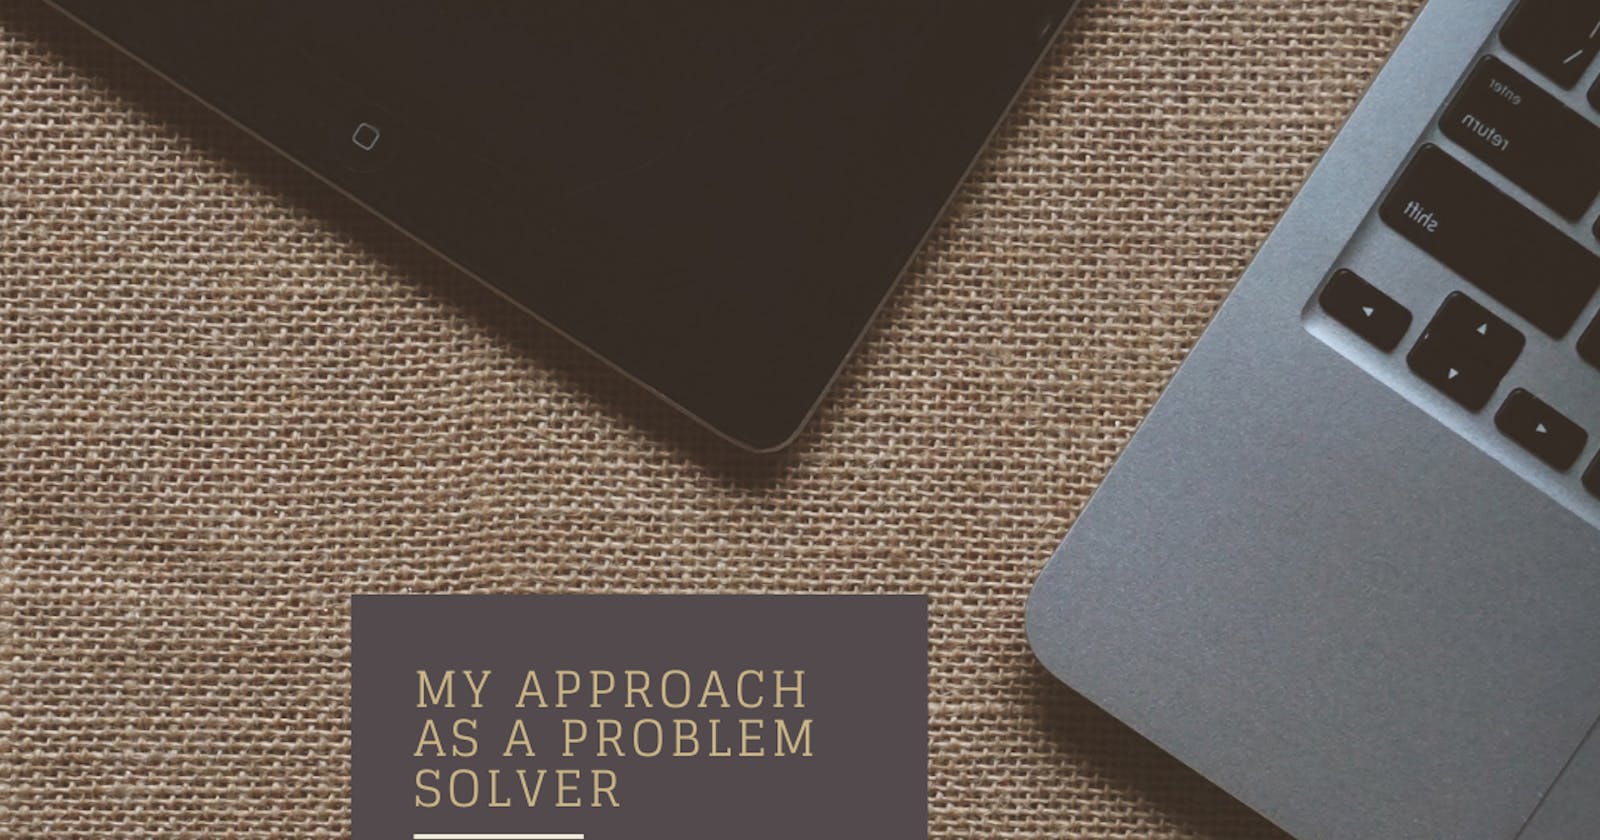 My approach as a problem solver